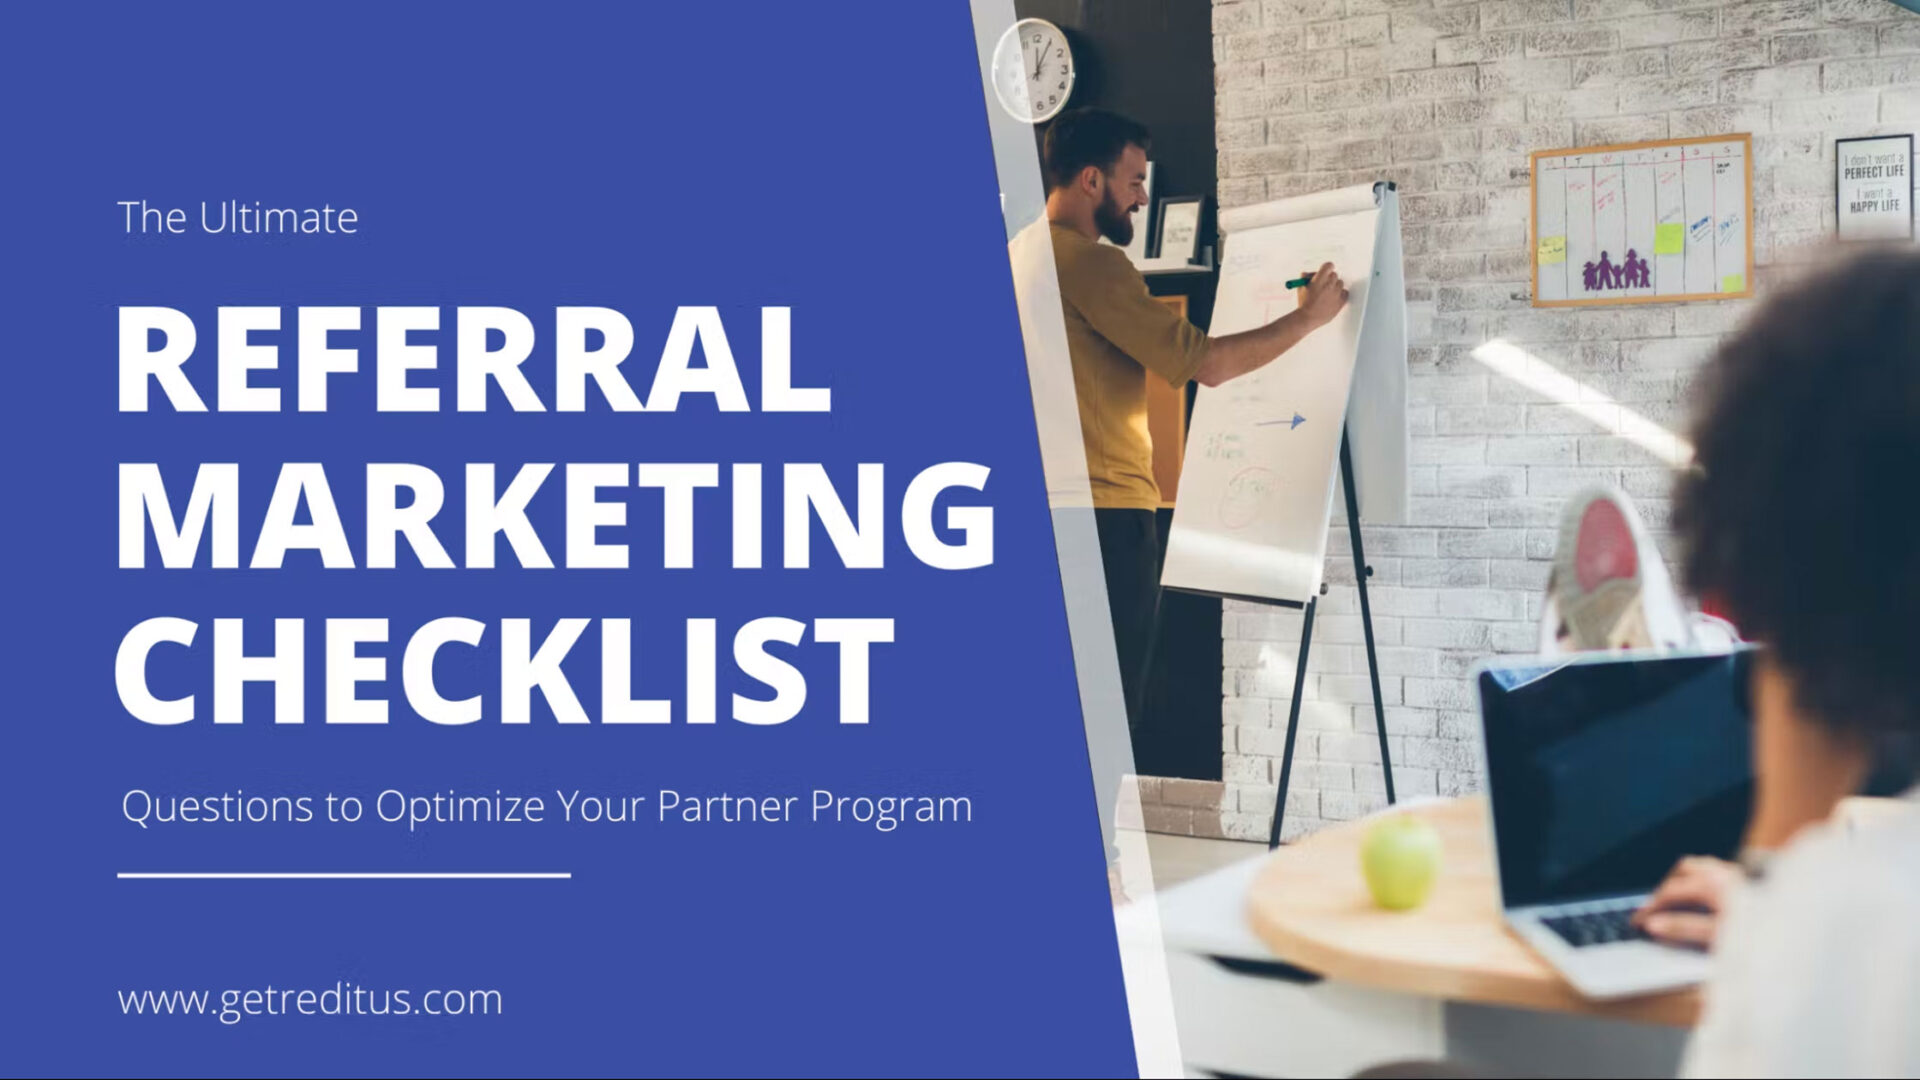 https://www.getreditus.com/blog/the-ultimate-referral-marketing-checklist-for-saas/